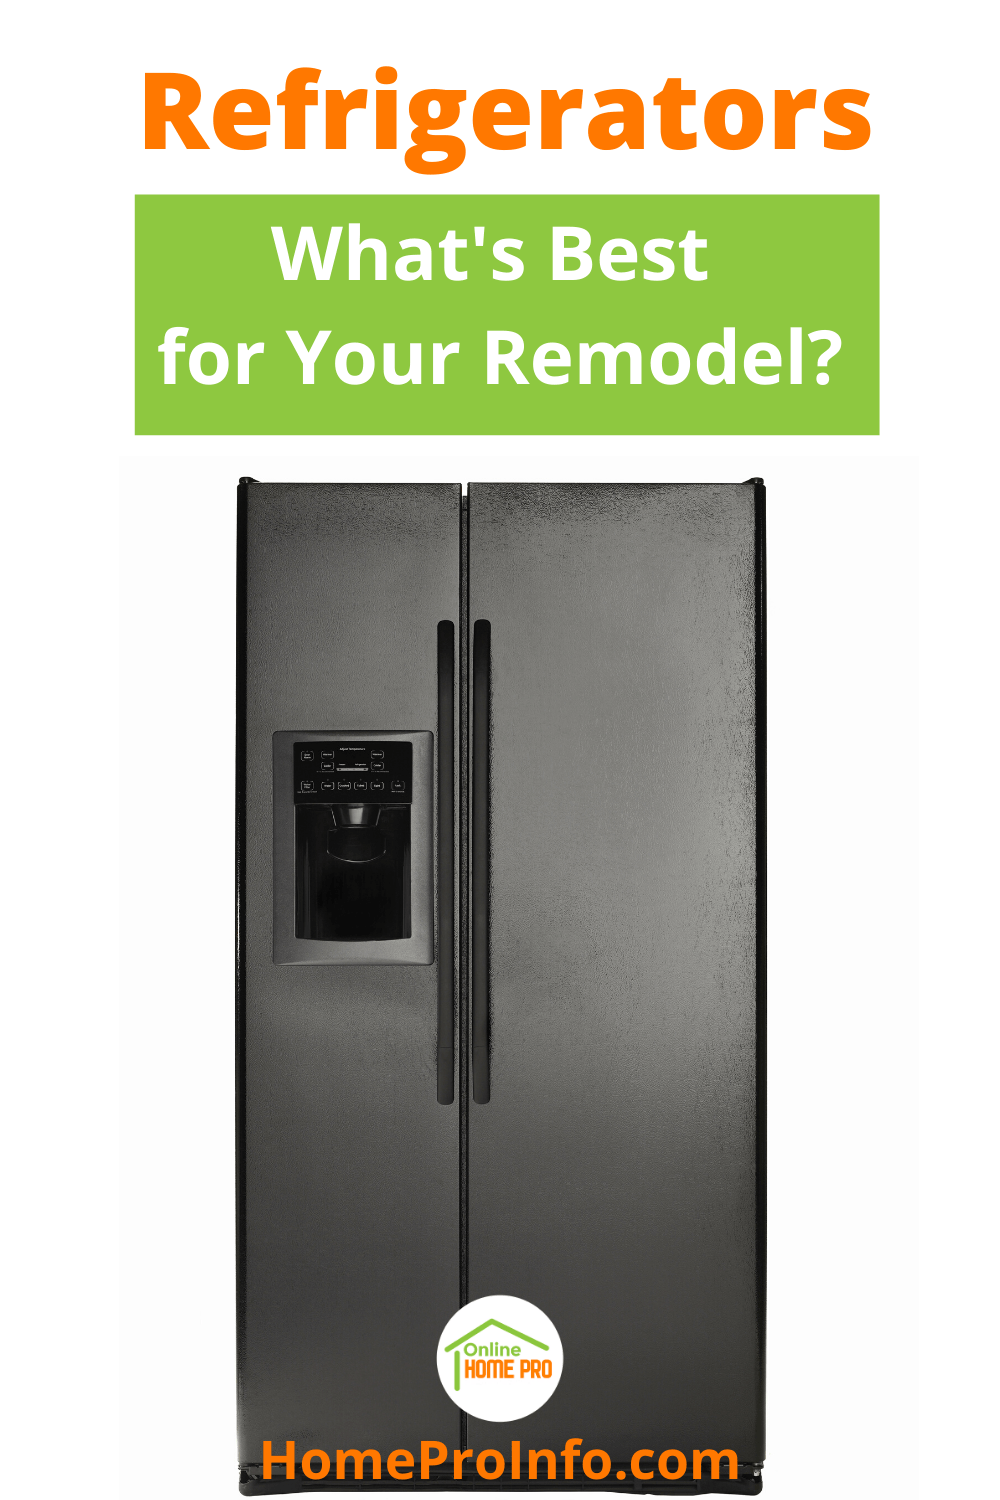 refrigerators and remodeling